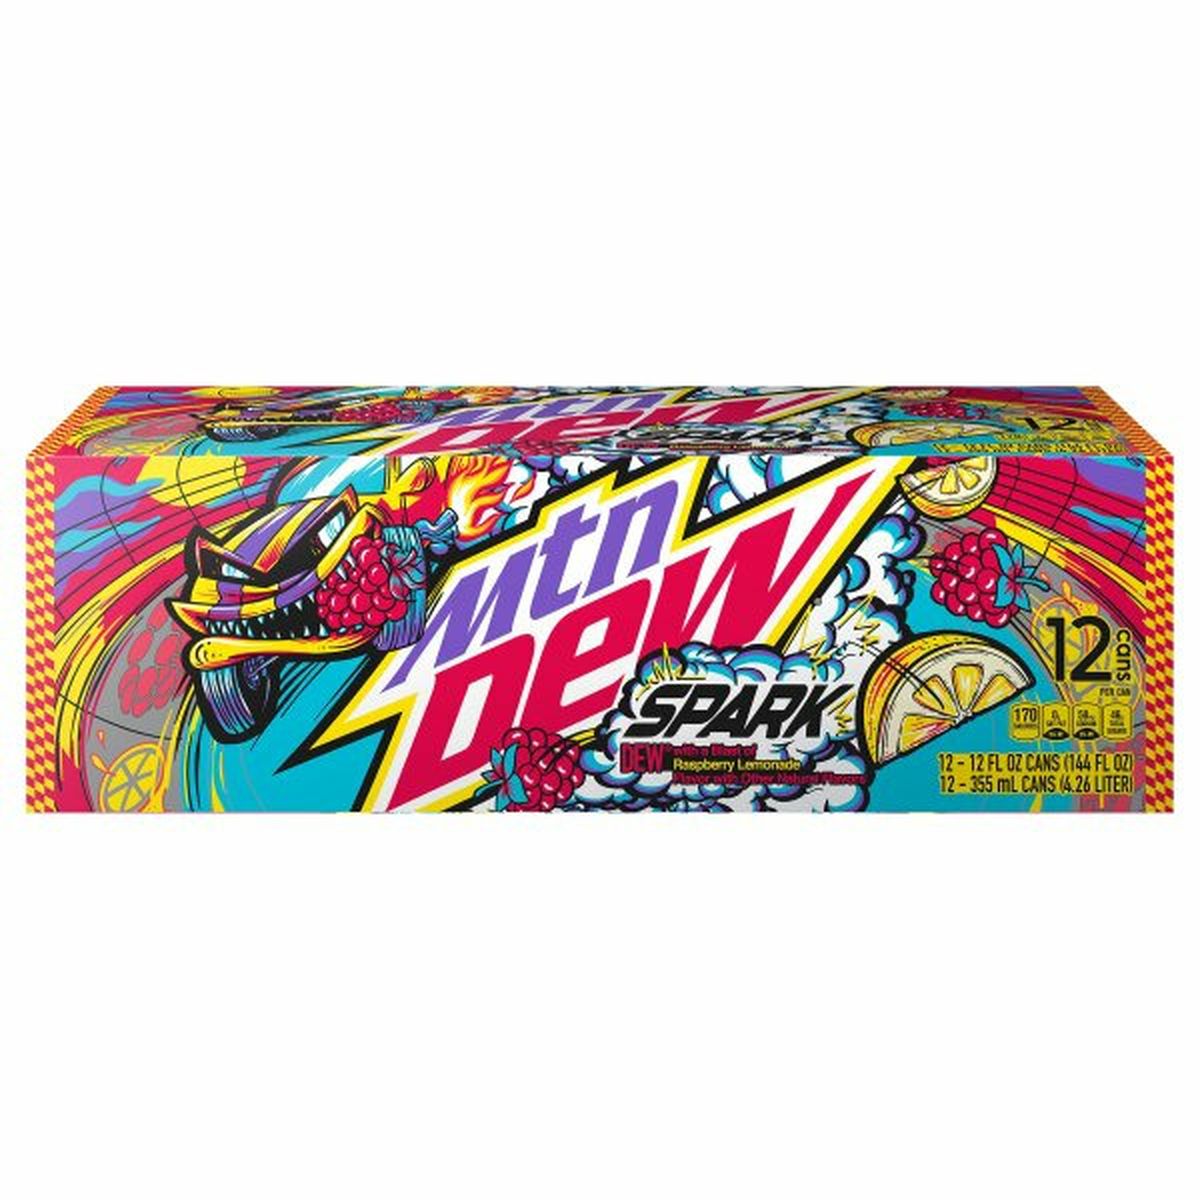 Calories in Mtn Dew Soda, Spark, 12 Cans